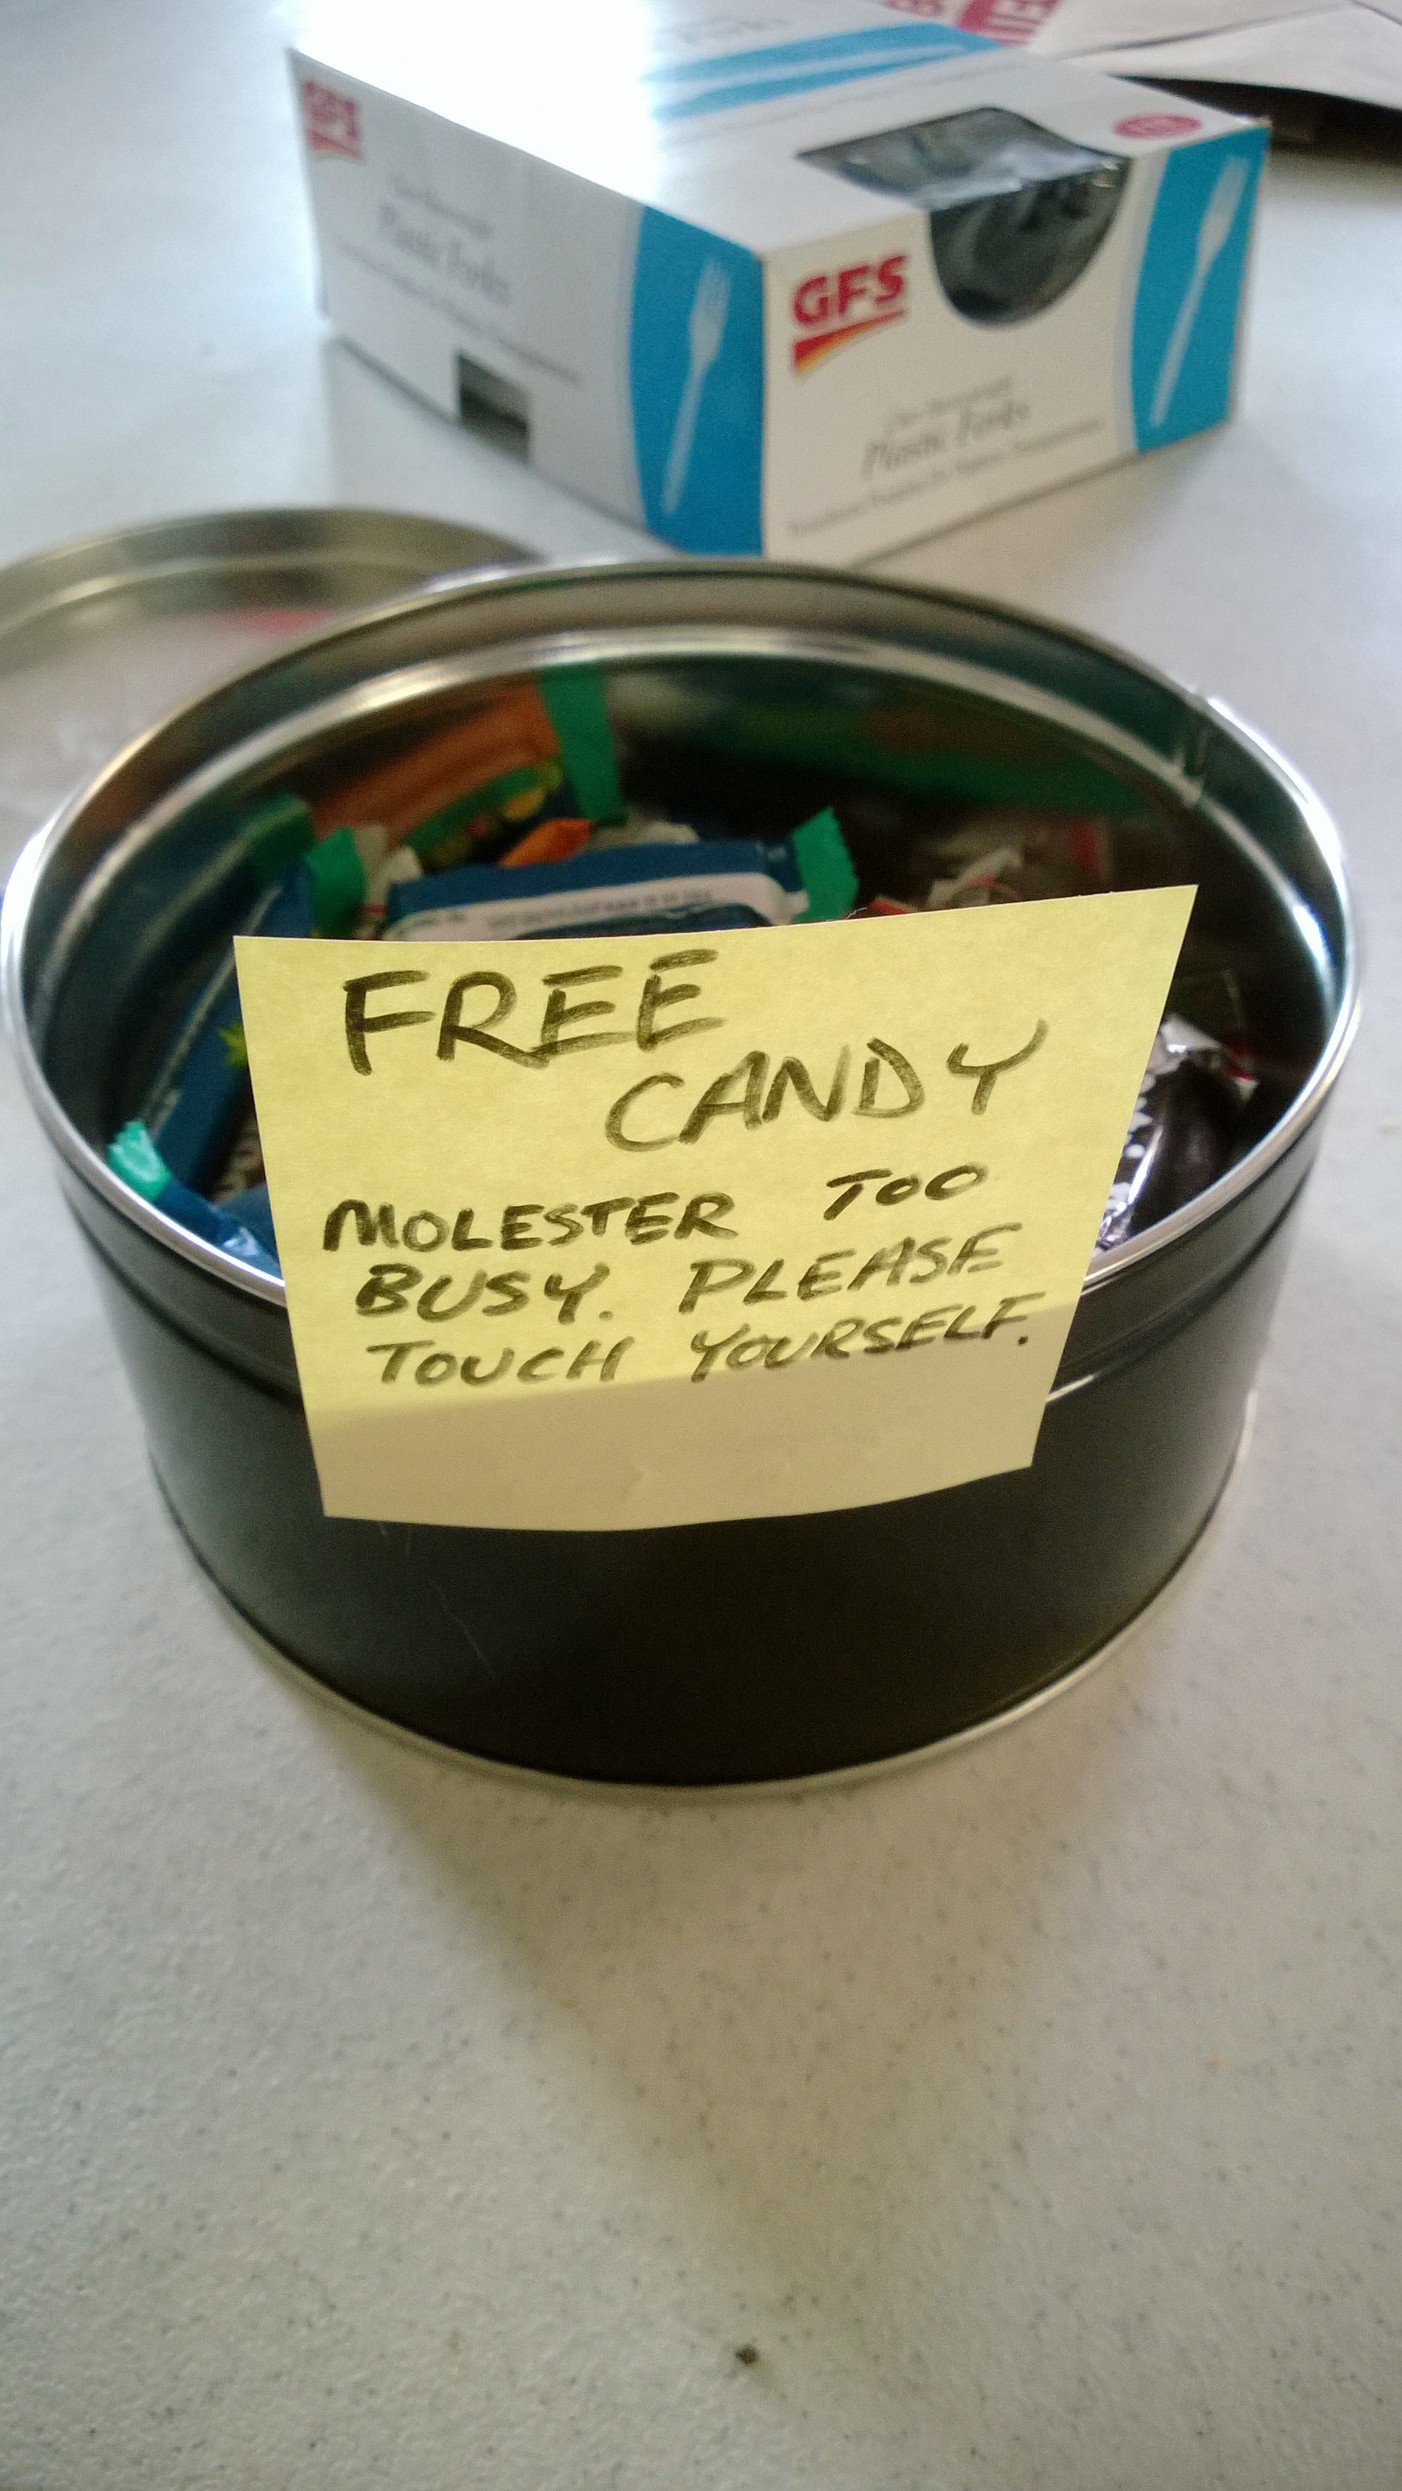 FREE CANDY! Molester too busy. Please touch yourself.